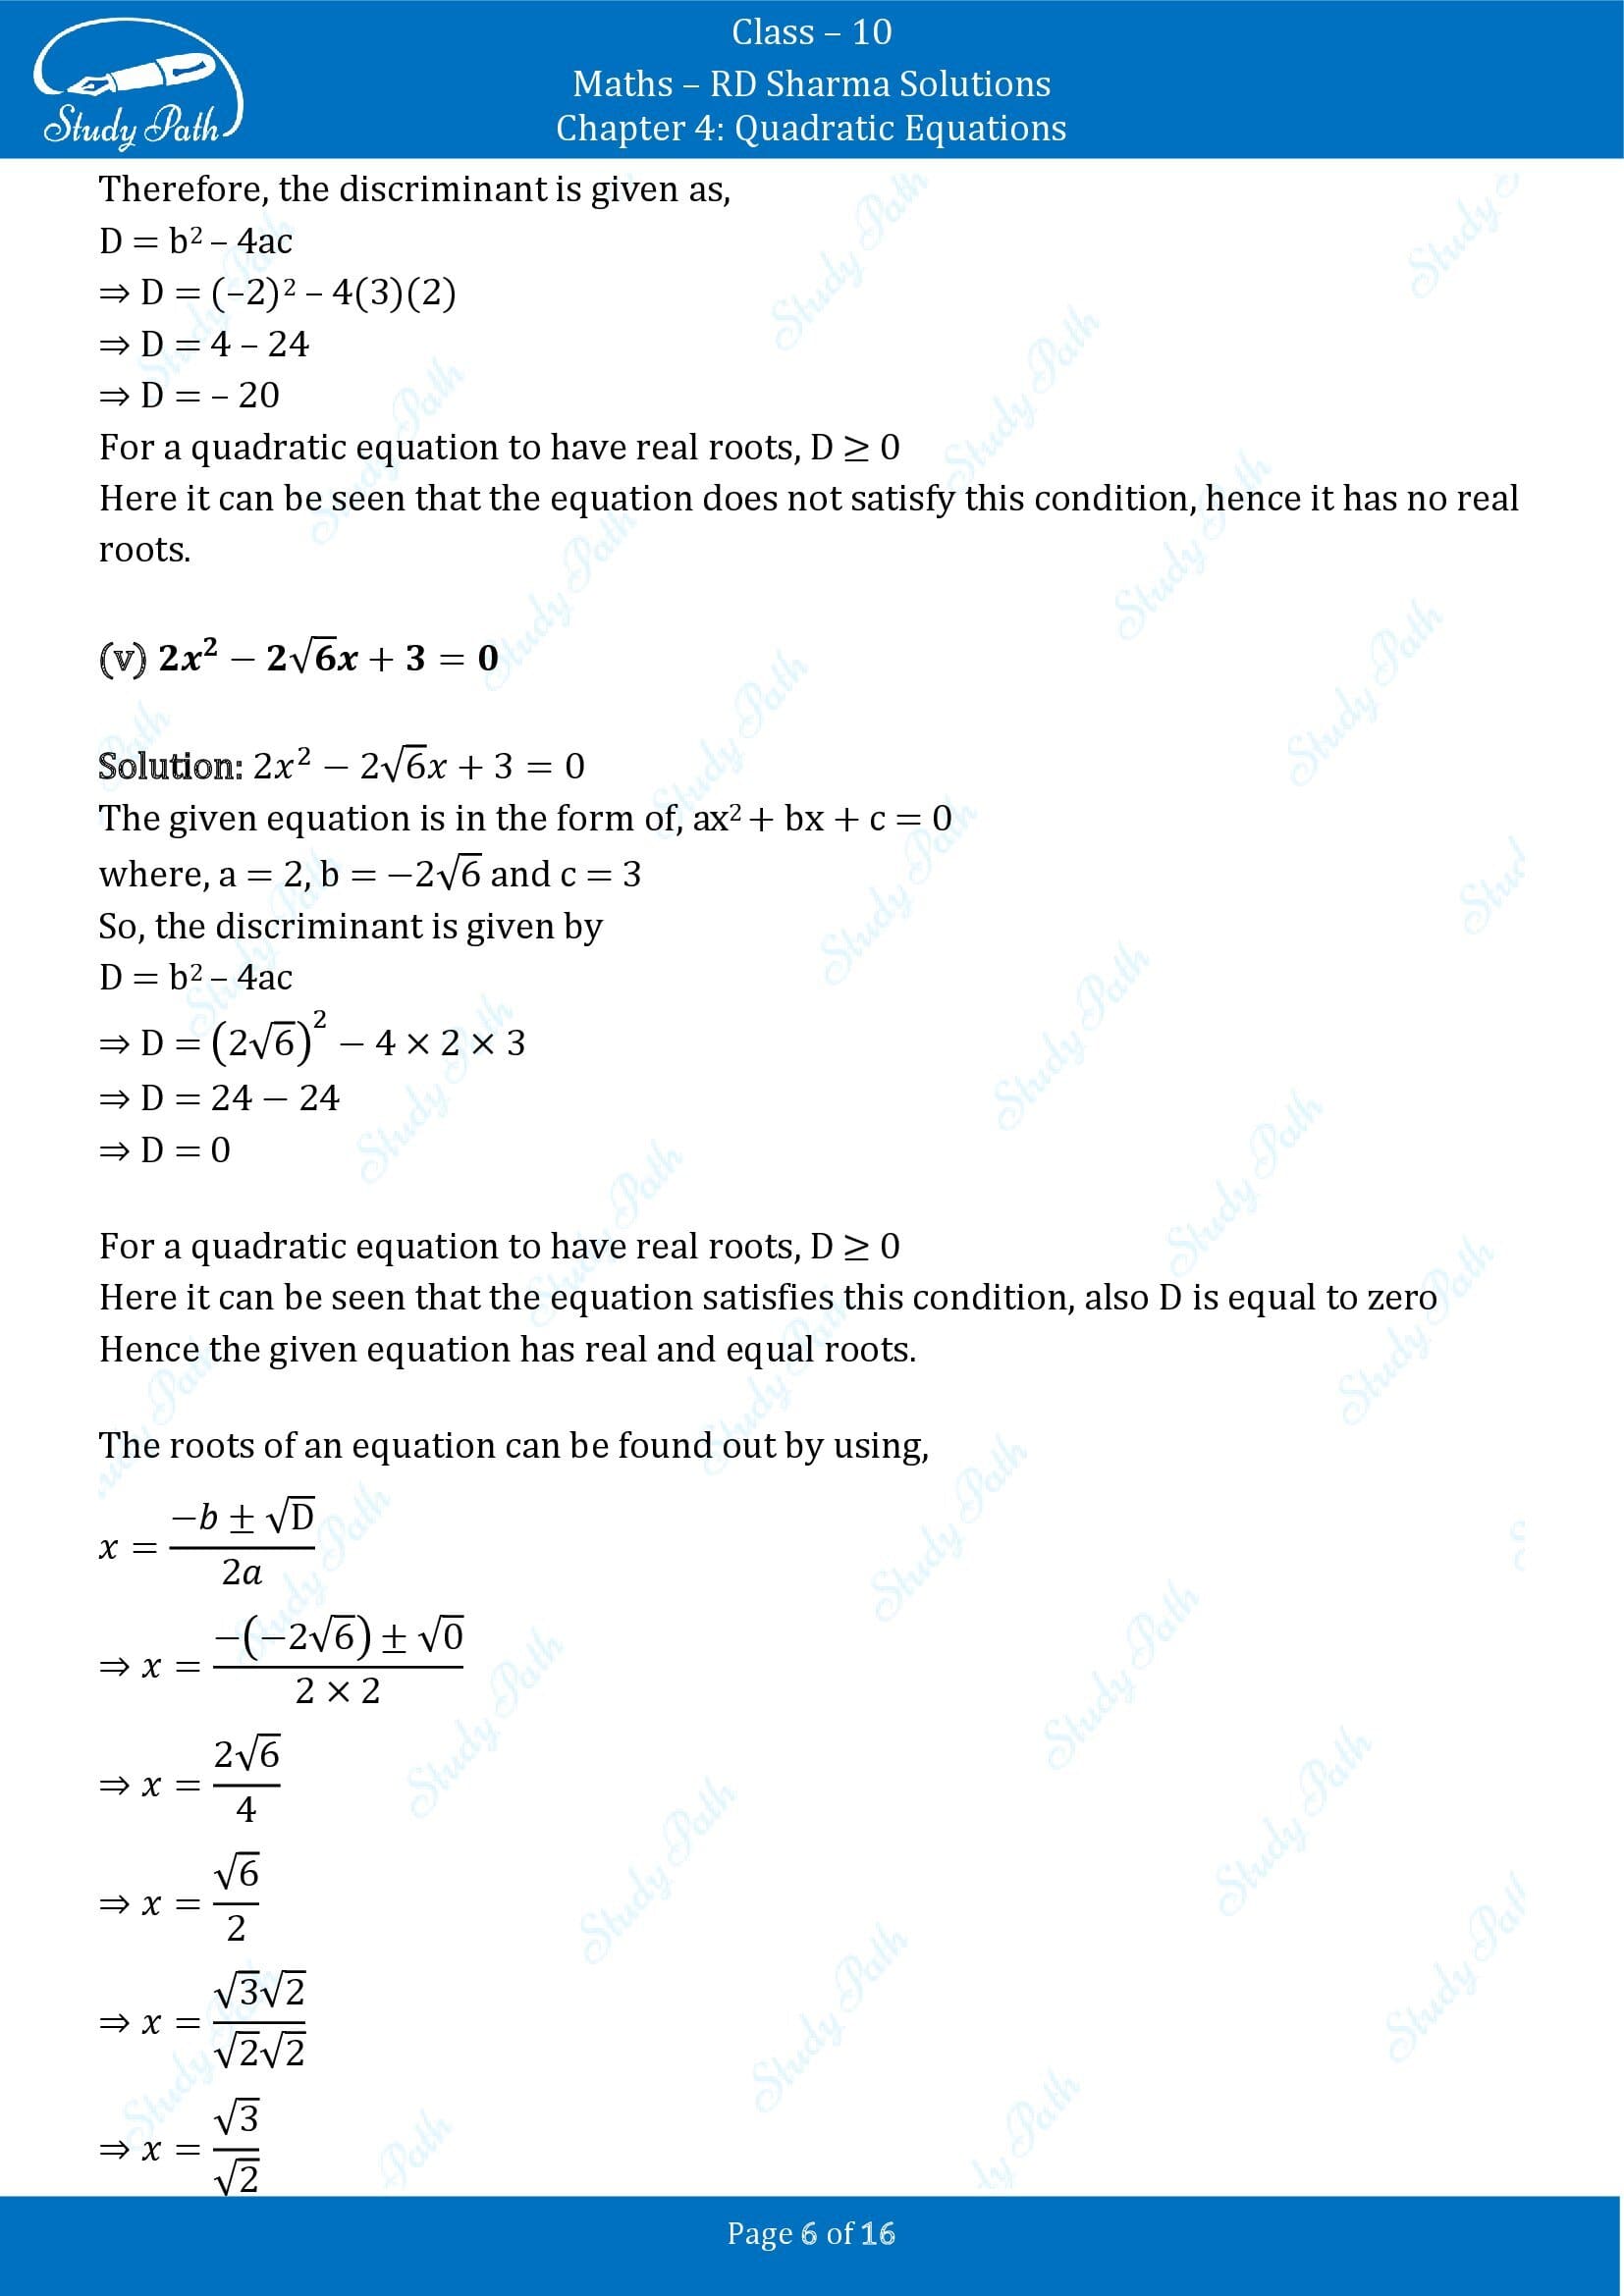 RD Sharma Solutions Class 10 Chapter 4 Quadratic Equations Exercise 4.5 00006